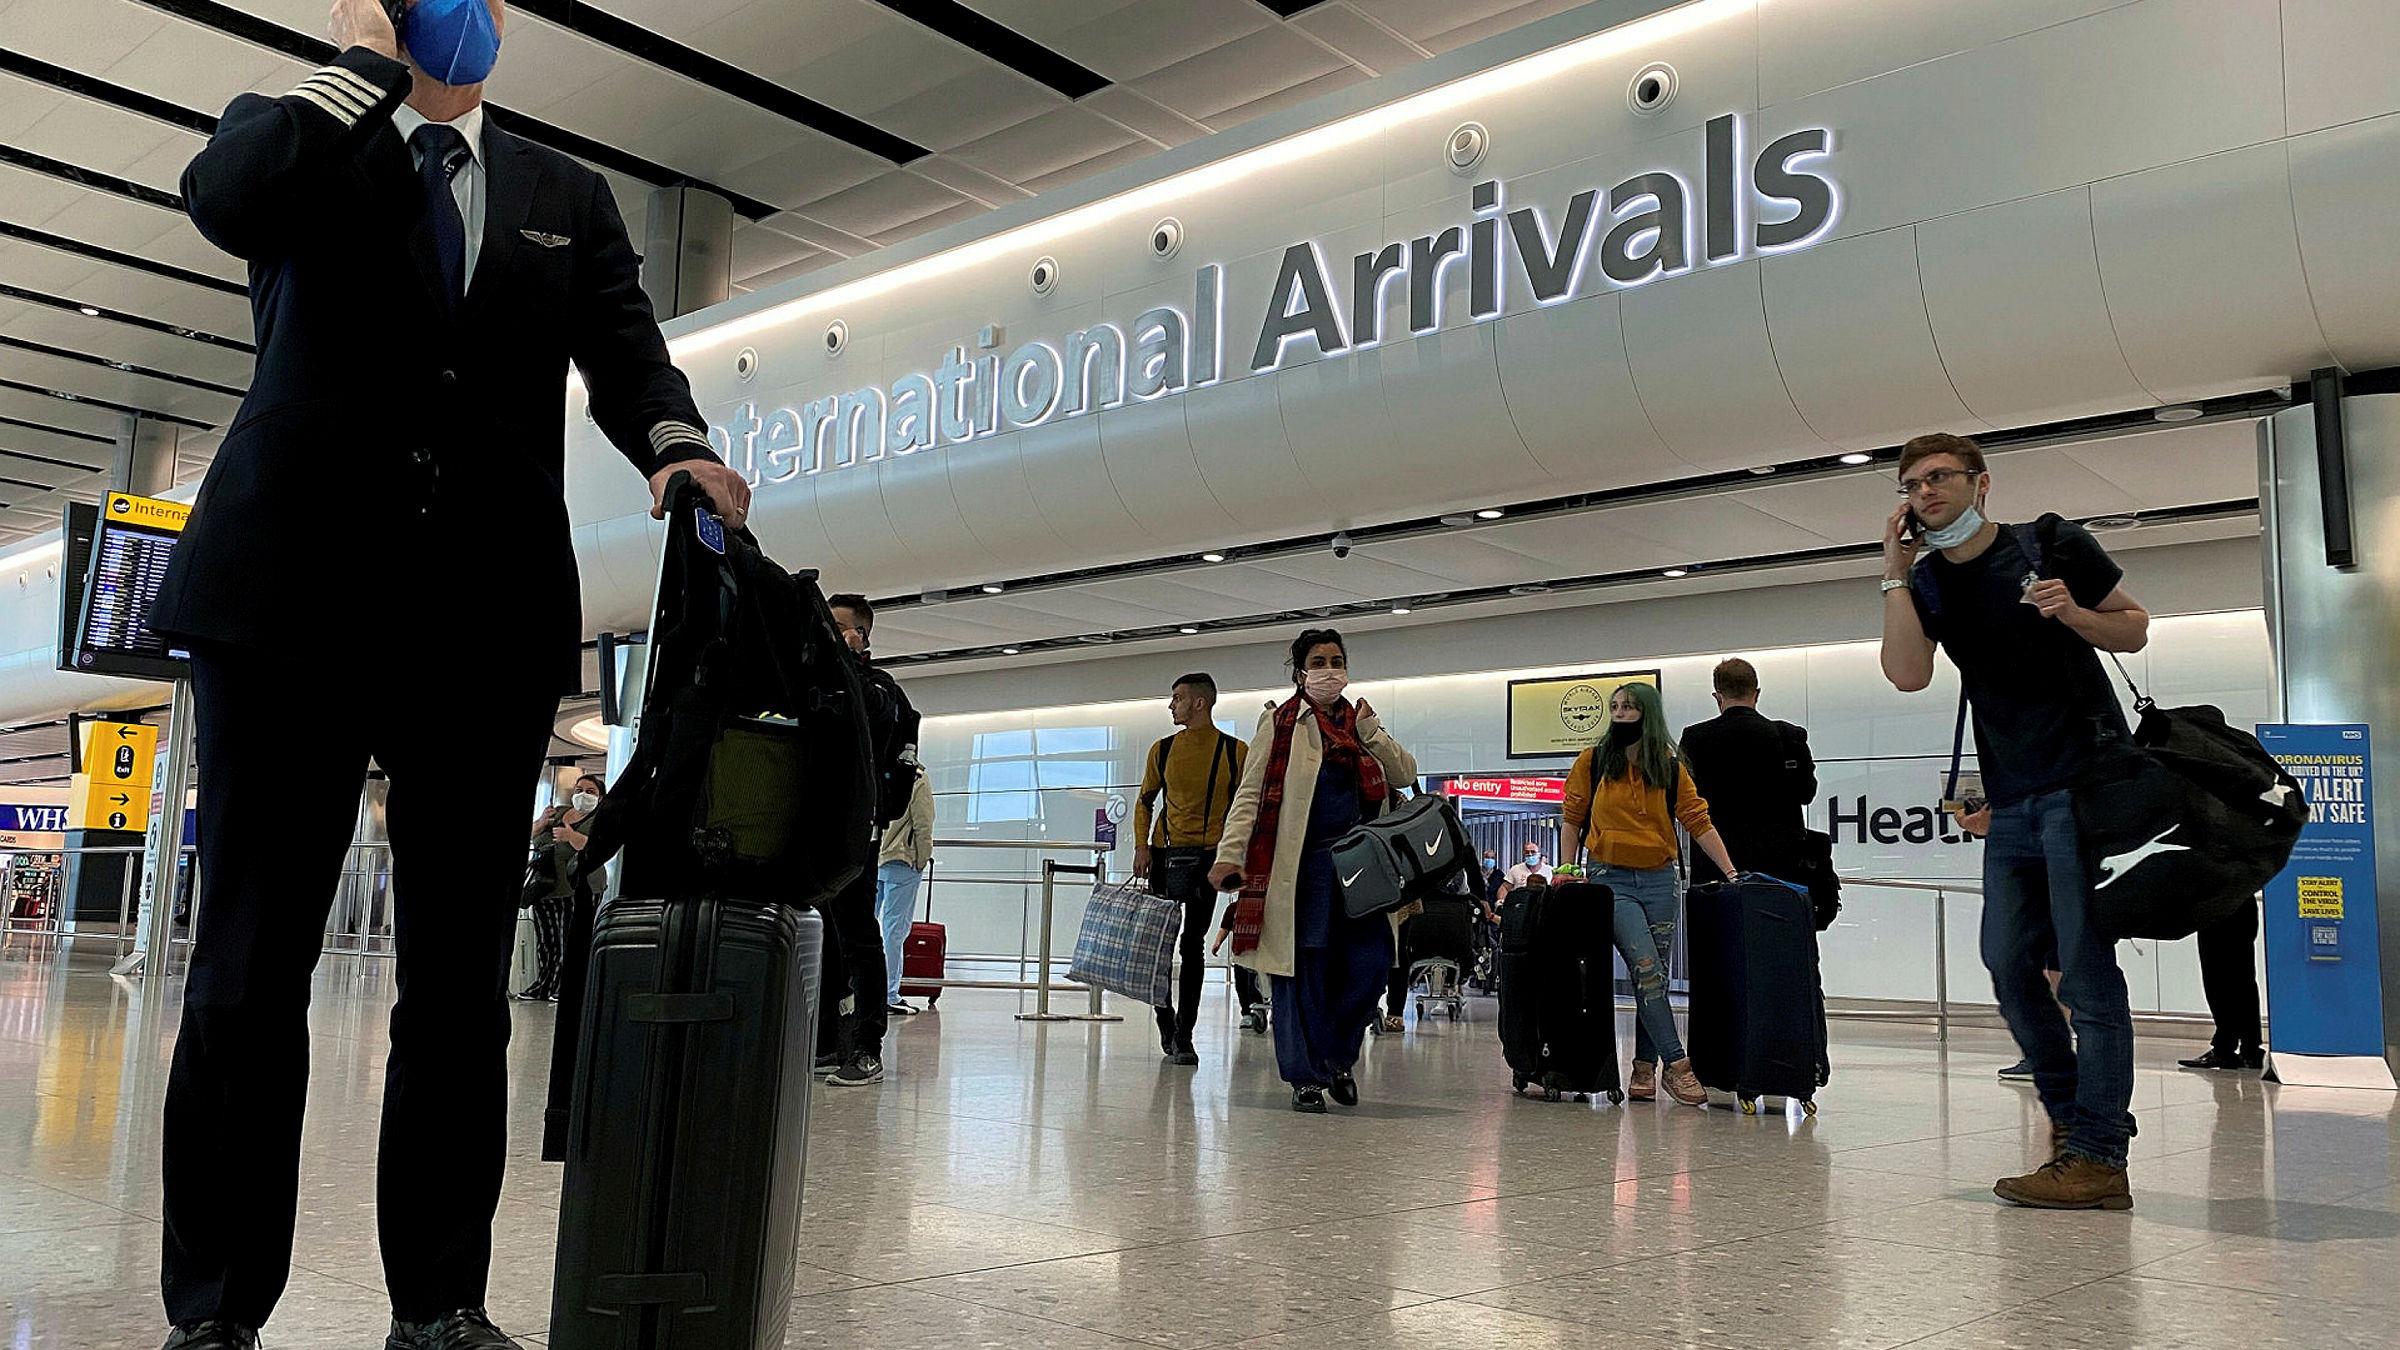 Heathrow to cut jobs as UK quarantine measures compound 'grim picture' |  Financial Times